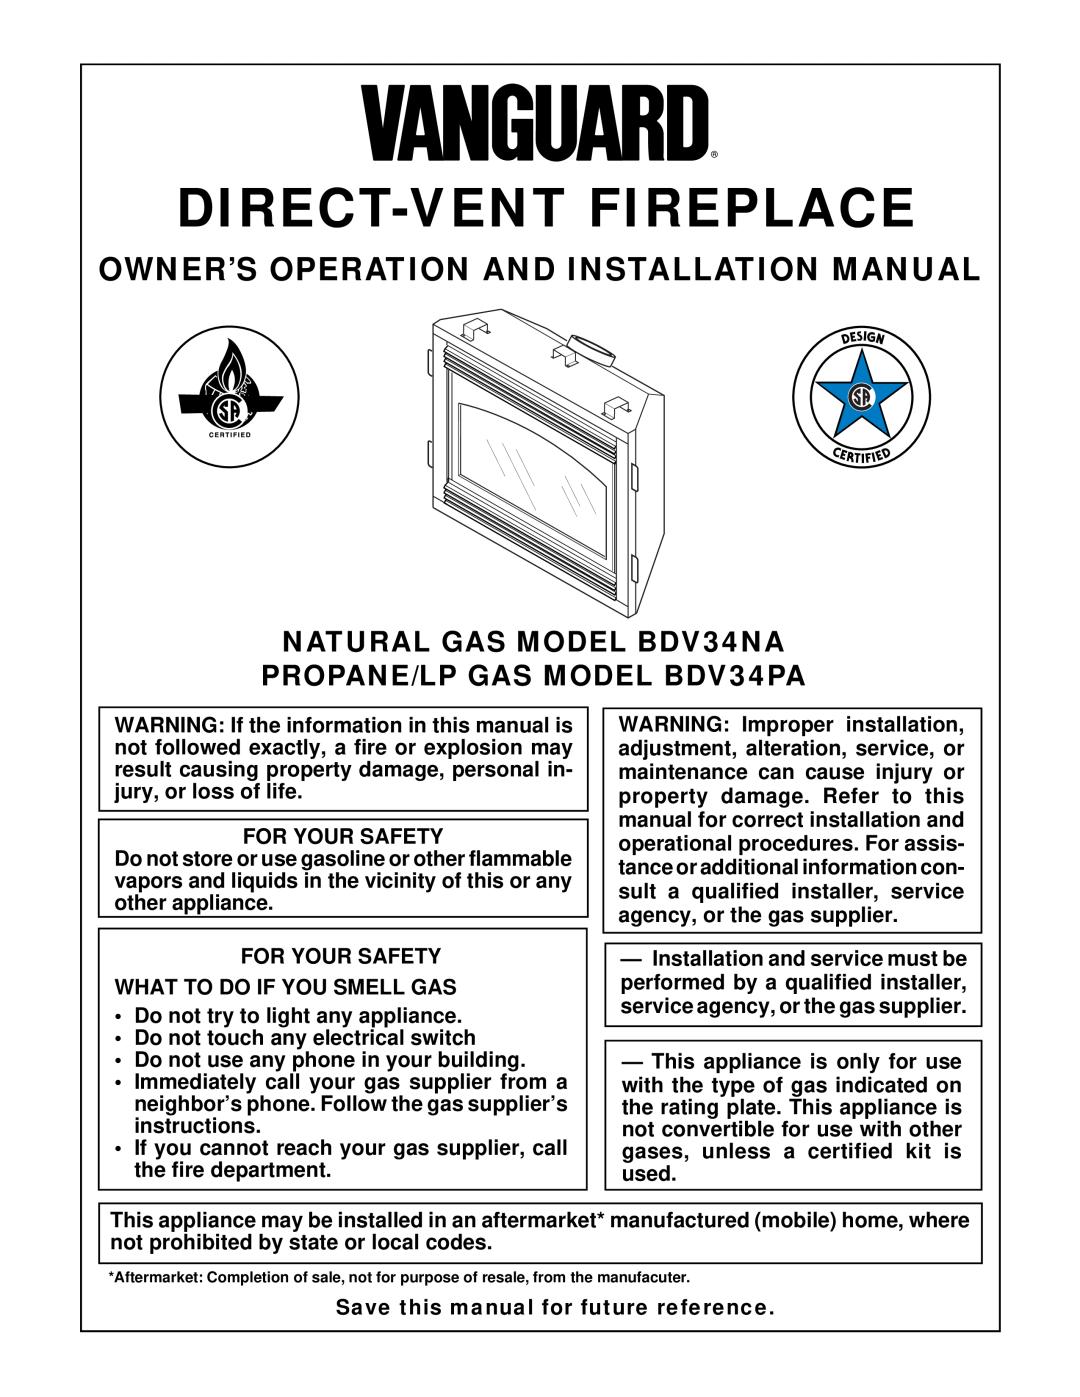 Desa BDV34PA installation manual Owner’S Operation And Installation Manual, NATURAL GAS MODEL BDV34NA, For Your Safety 